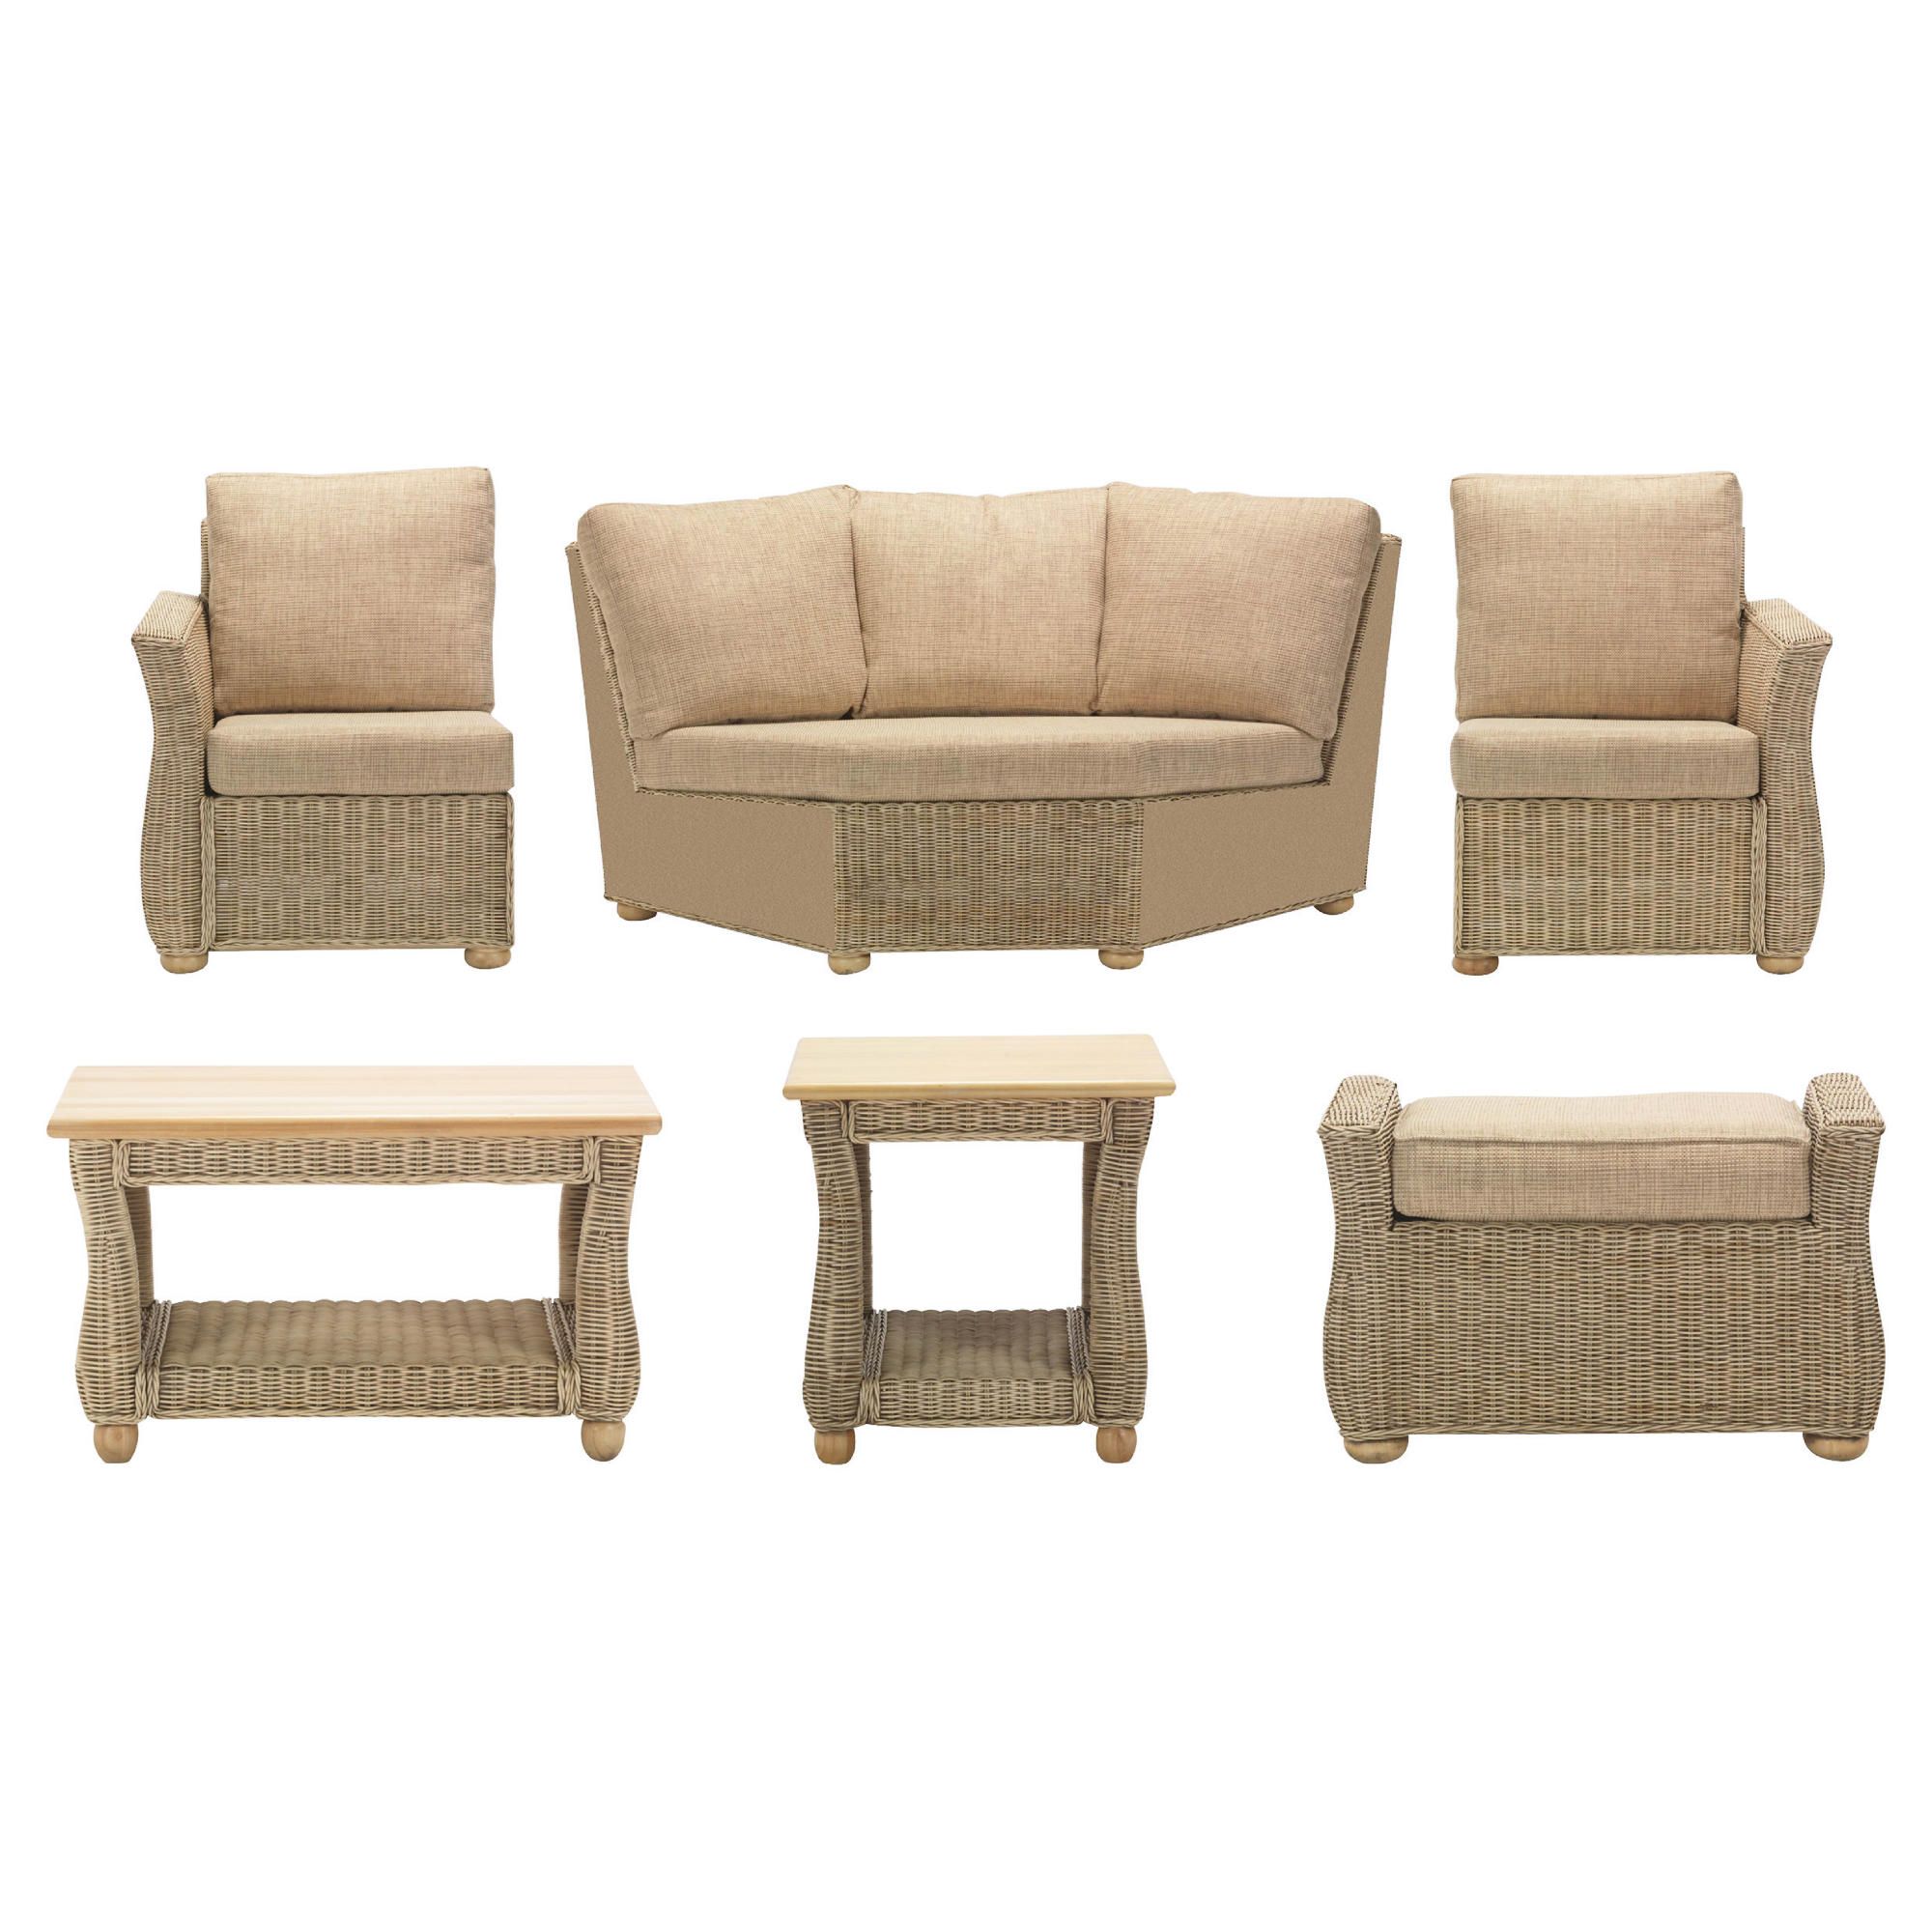 Corsica 6 Piece Suite Conservatory Set (Left, Right, Corner, Coffee table, Lamp table & Footstool) at Tesco Direct